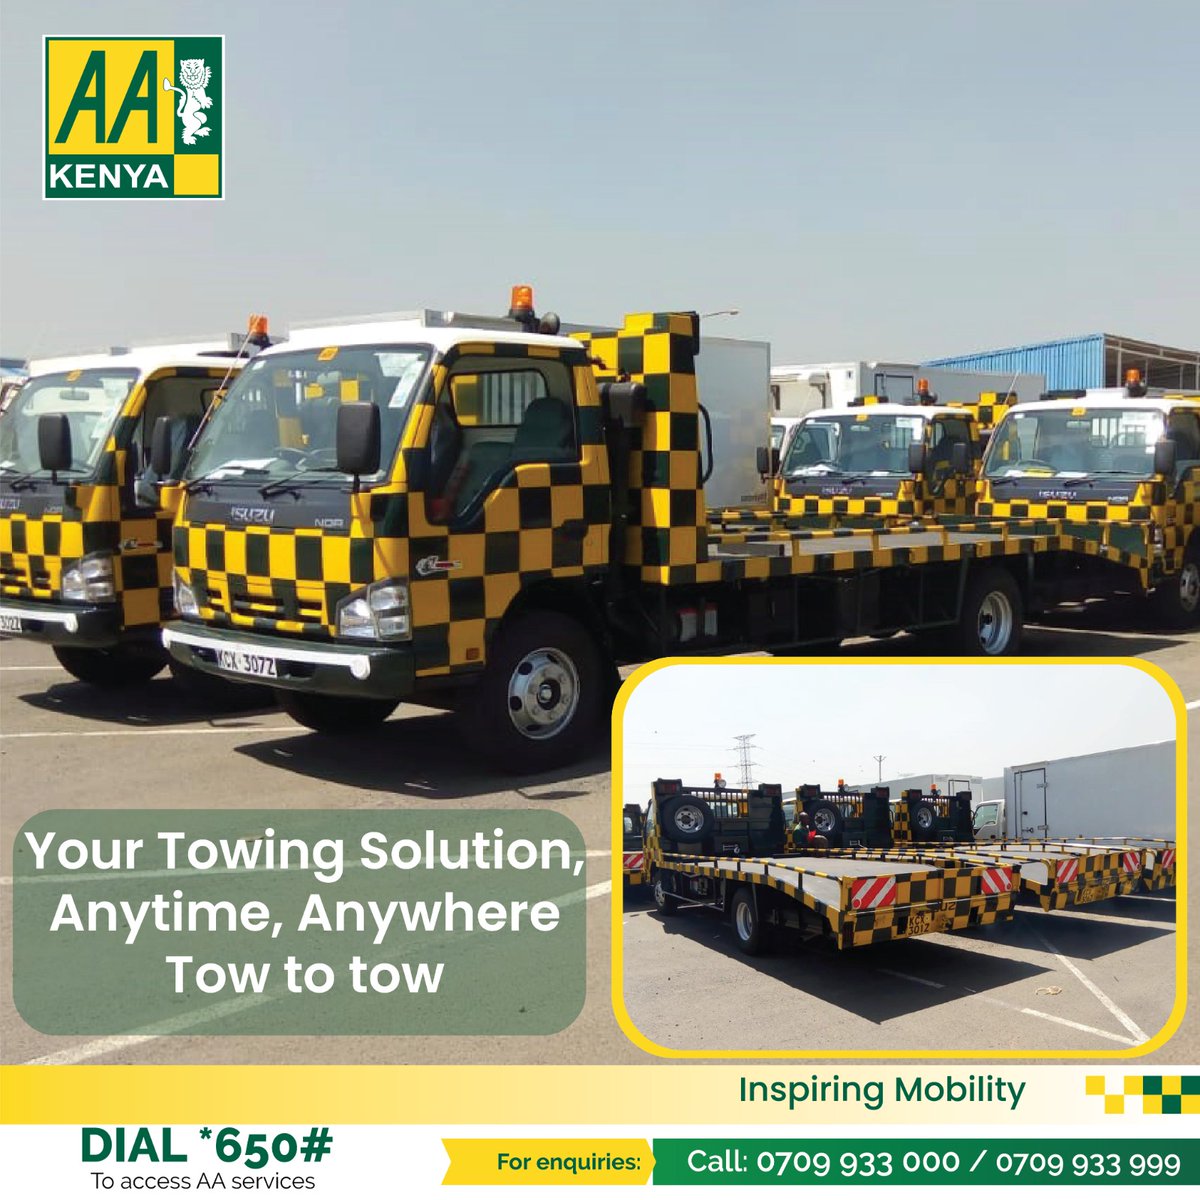 Reliable and fast! AA Kenya towing service is your solution for roadside assistance. Call us today on 0709933000/999 for a hassle-free rescue
#AAKenyacares #InspiringMobility #TowingService